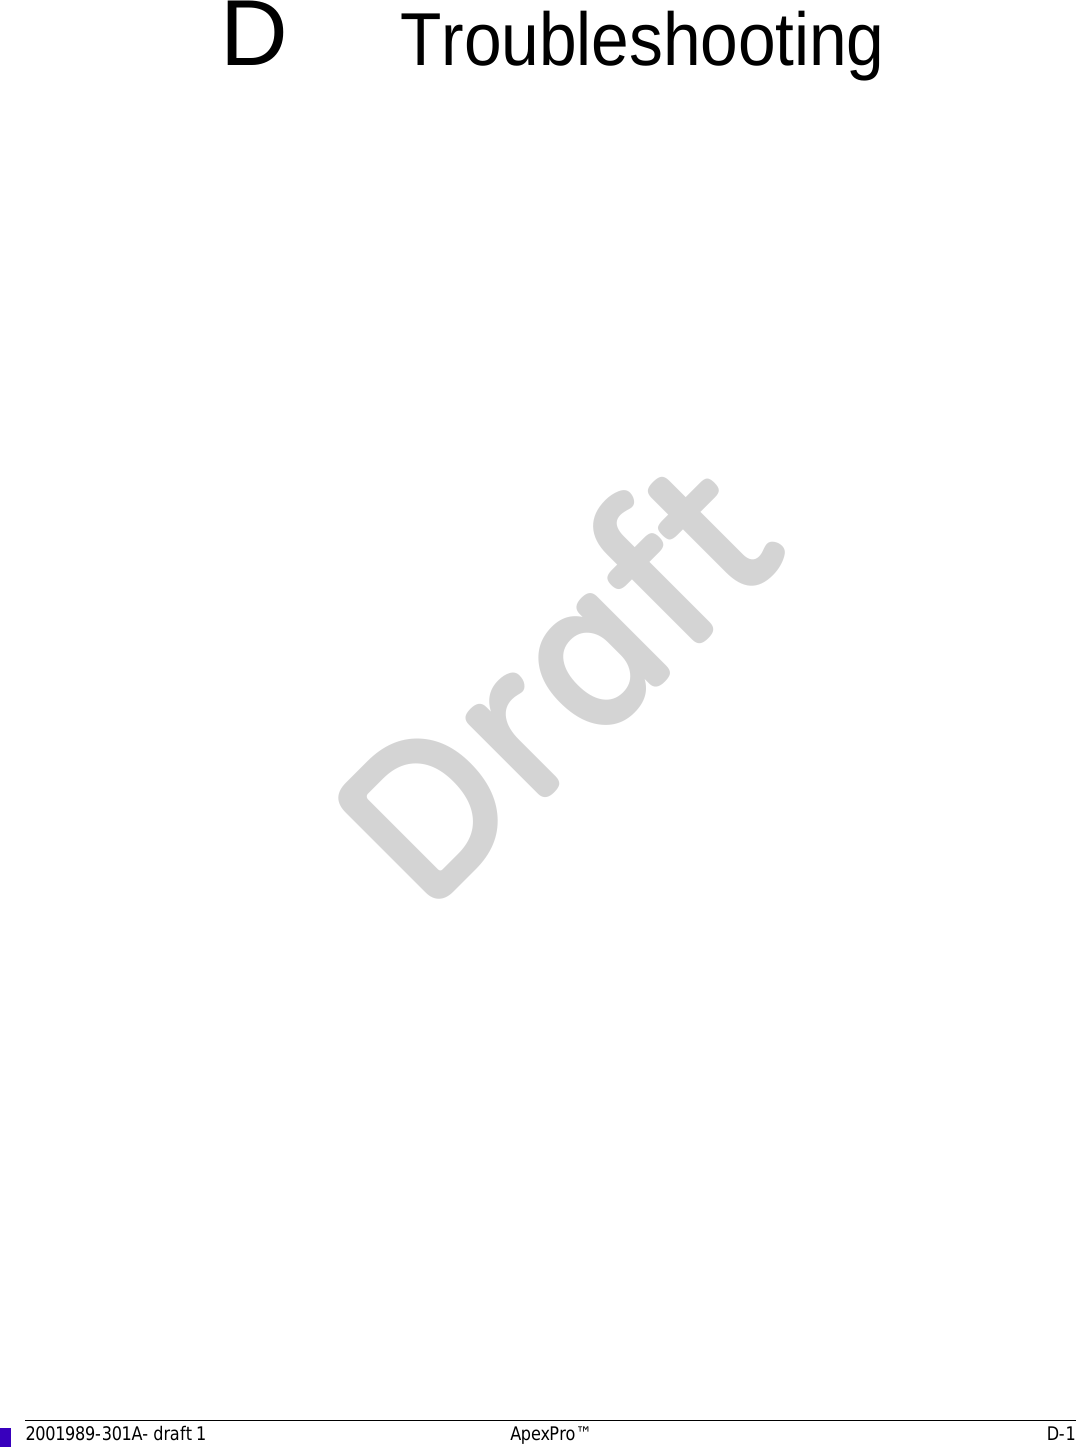 2001989-301A- draft 1 ApexPro™ D-1DTroubleshootingDraft